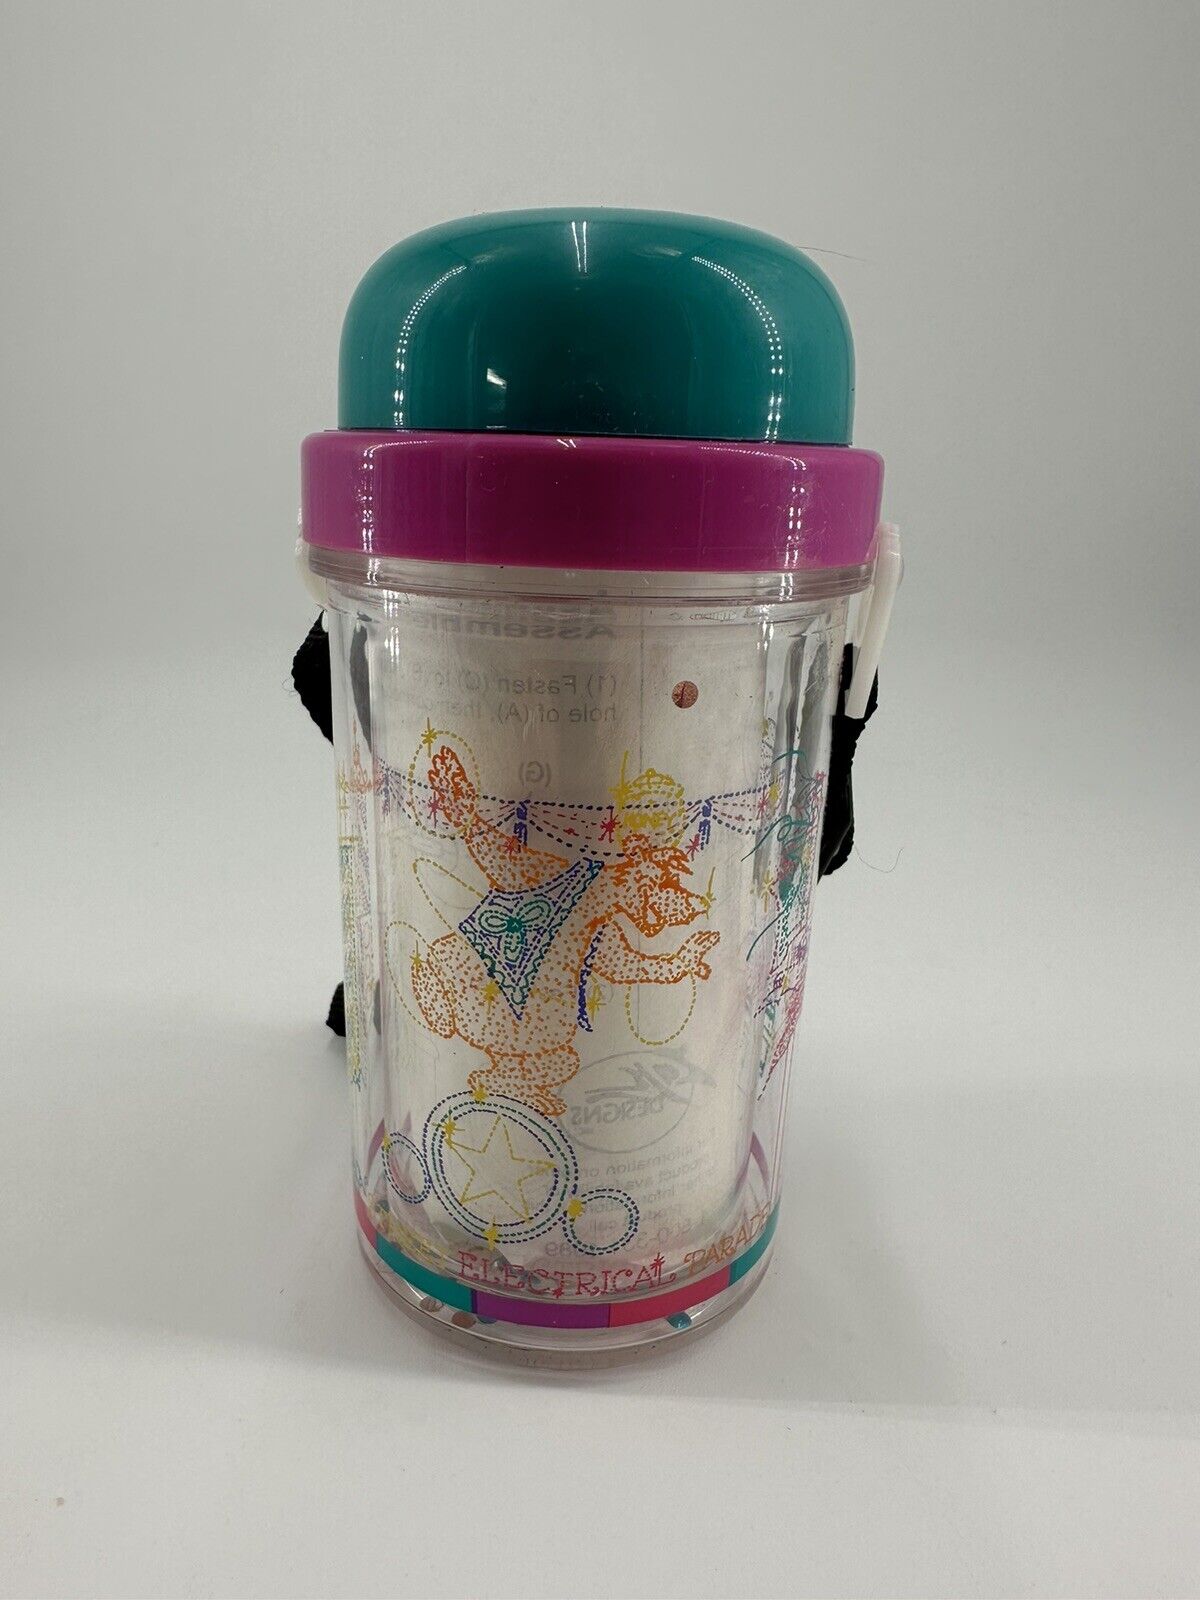 NEW Vintage Disneyland Main Street Electrical Parade Sippy Cup With Strap